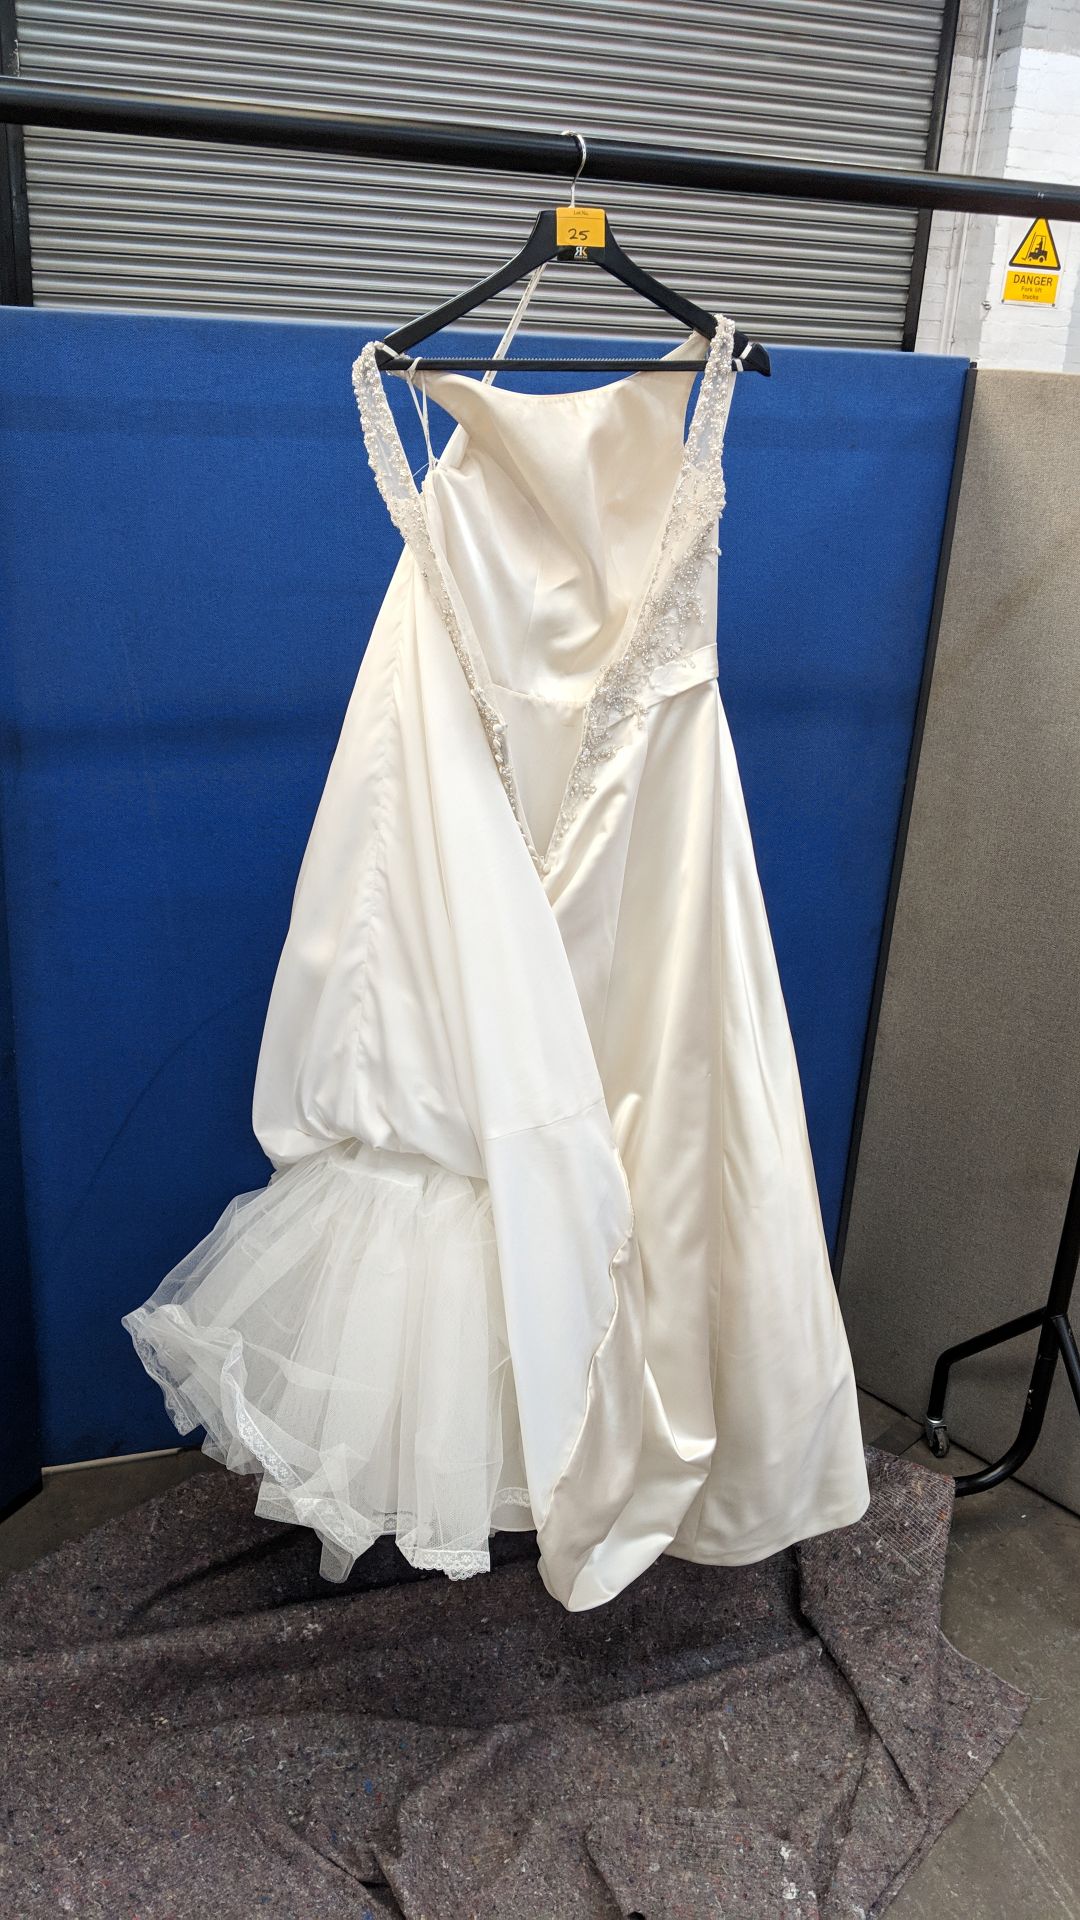 Kenneth Winston Private Label by G (Bridal Design House) wedding dress, retail price £1,440, style - Image 3 of 5